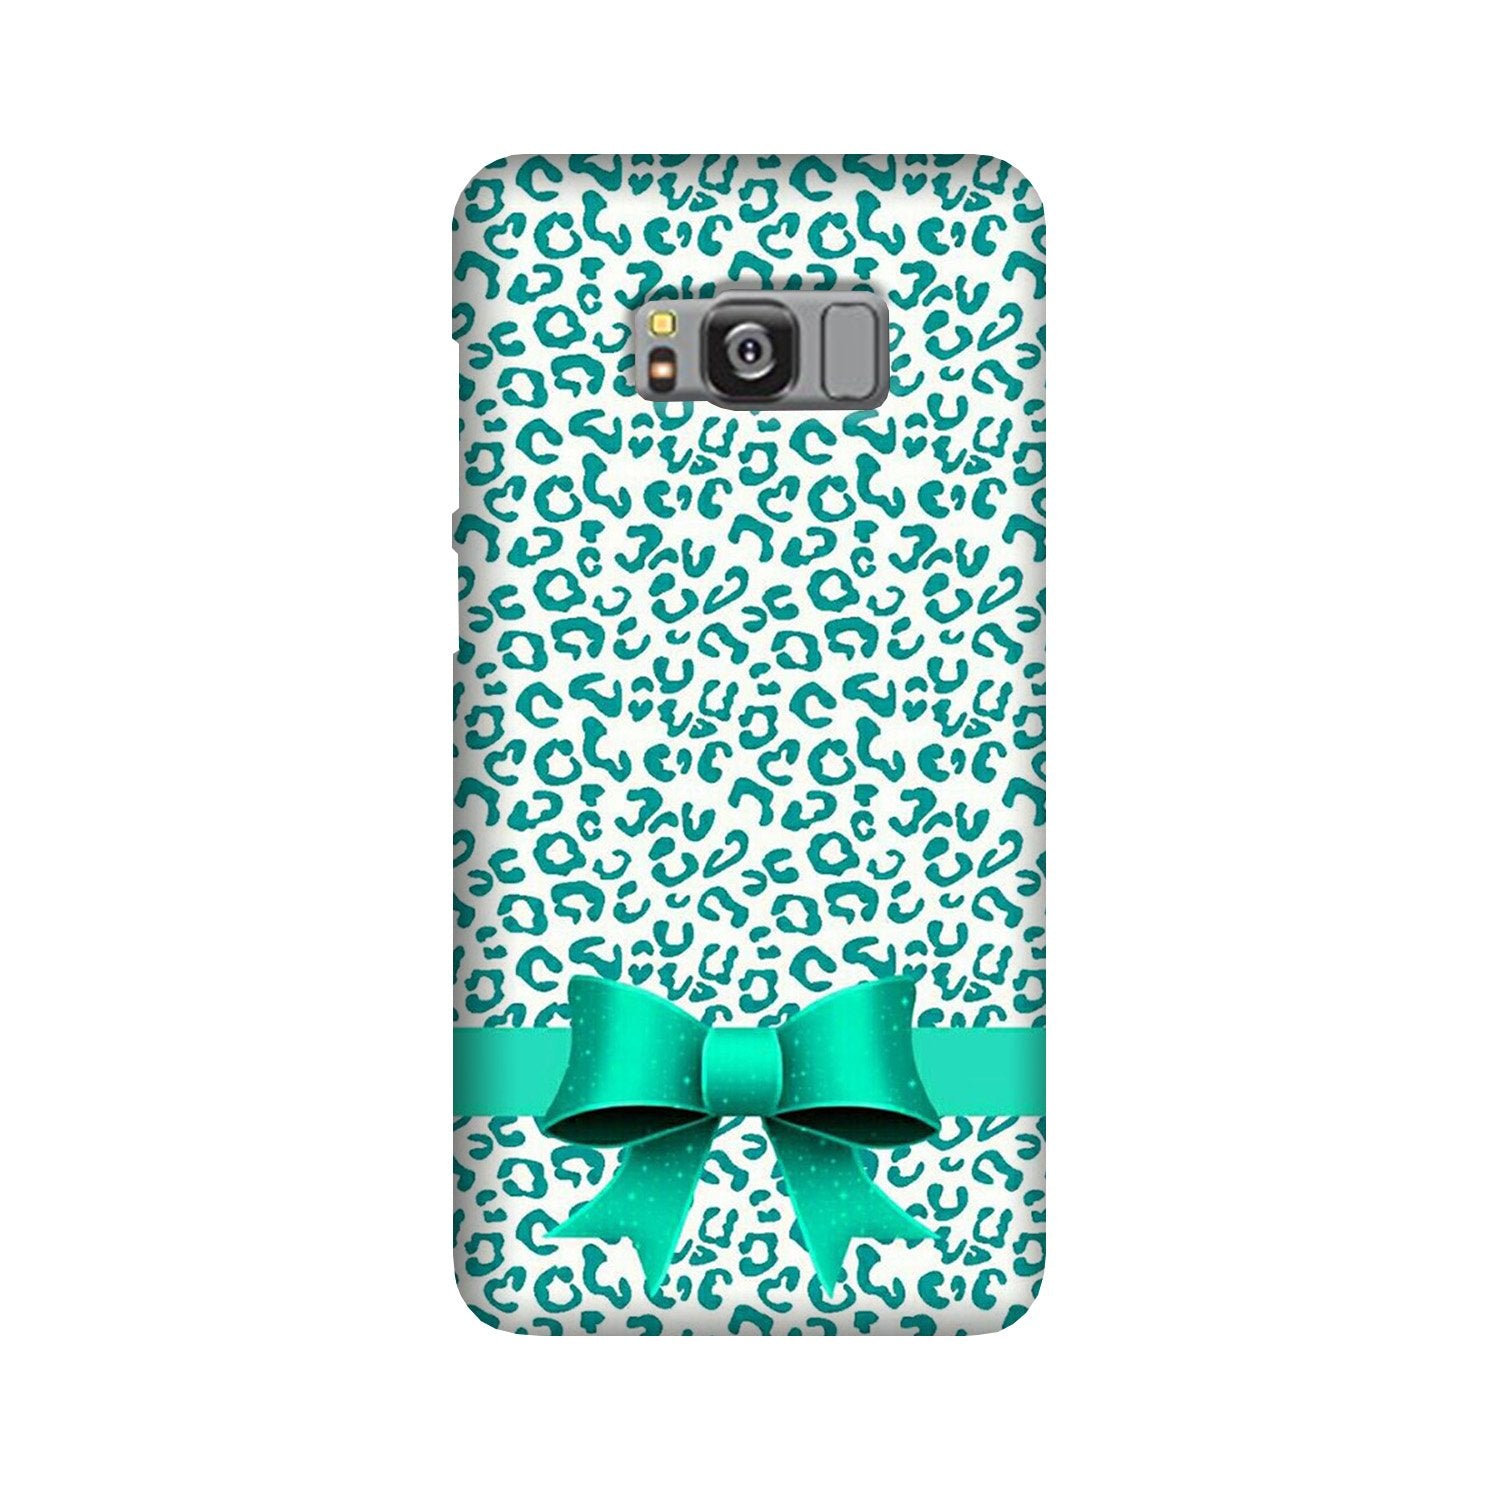 Gift Wrap6 Case for Galaxy S8